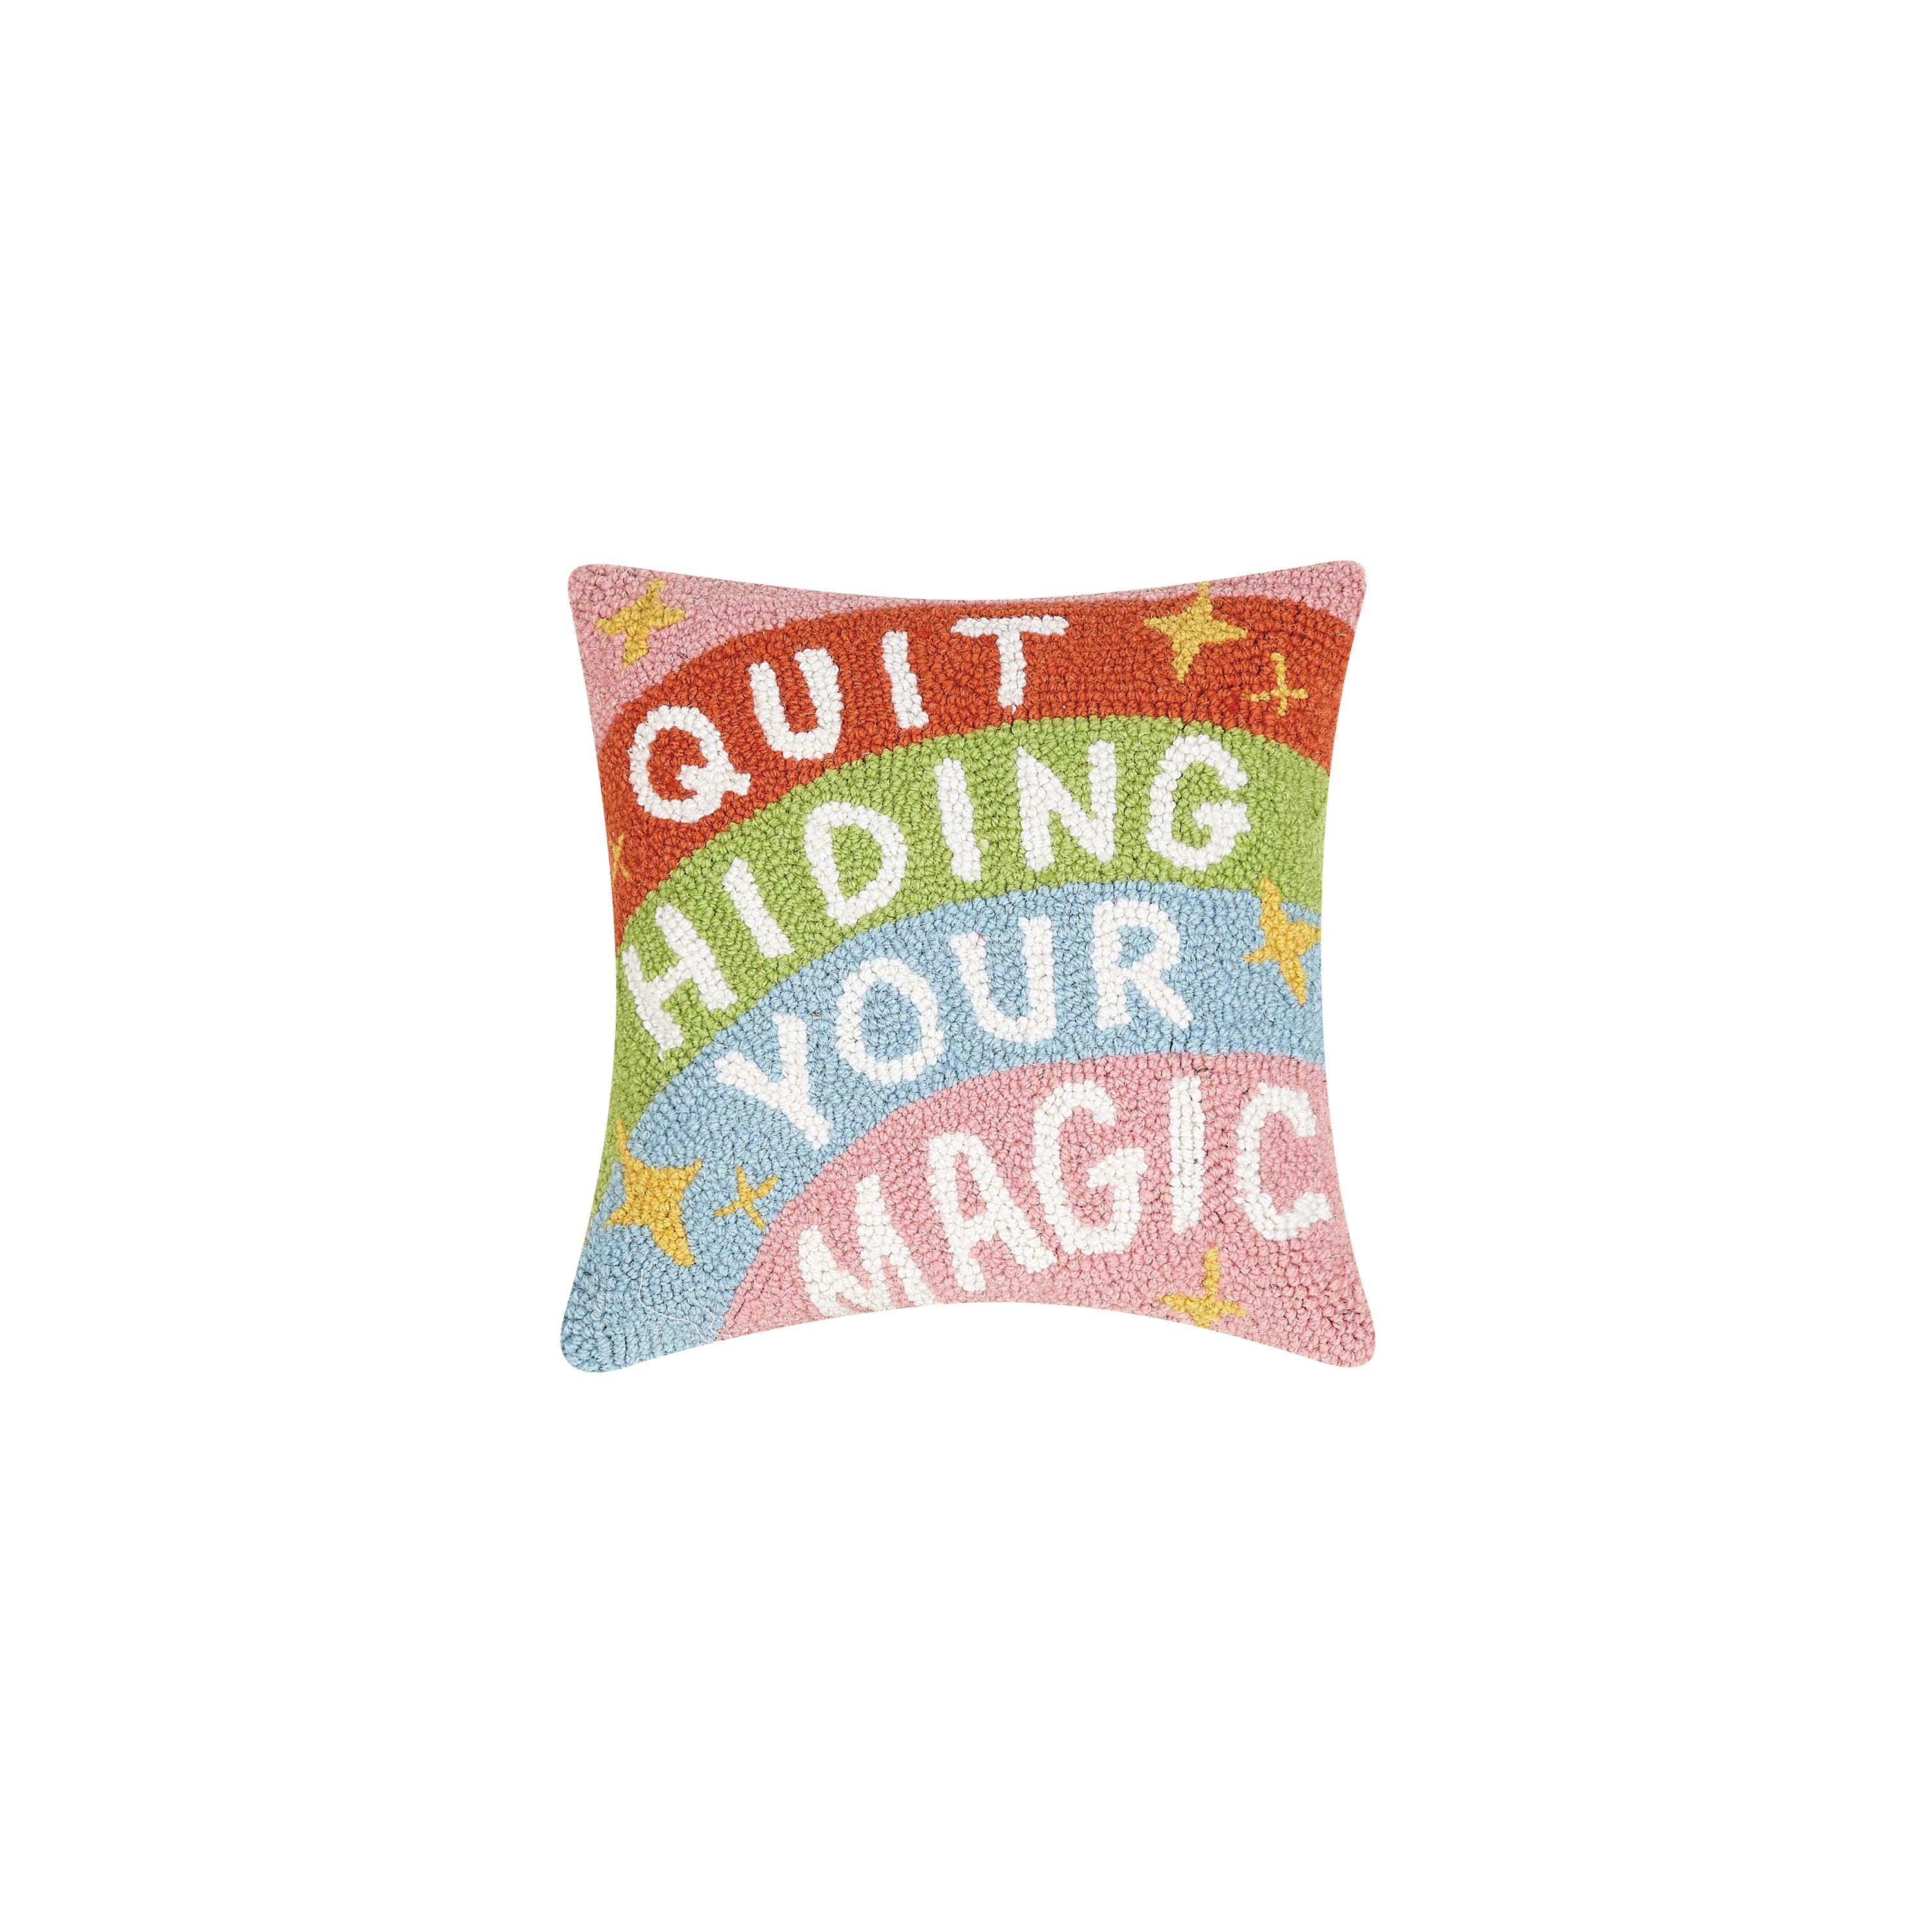 https://ak1.ostkcdn.com/images/products/is/images/direct/bc40129c9a3dd7092a2add5632c404baa77099c9/Quit-Hiding-Your-Magic-Hook-Pillow.jpg